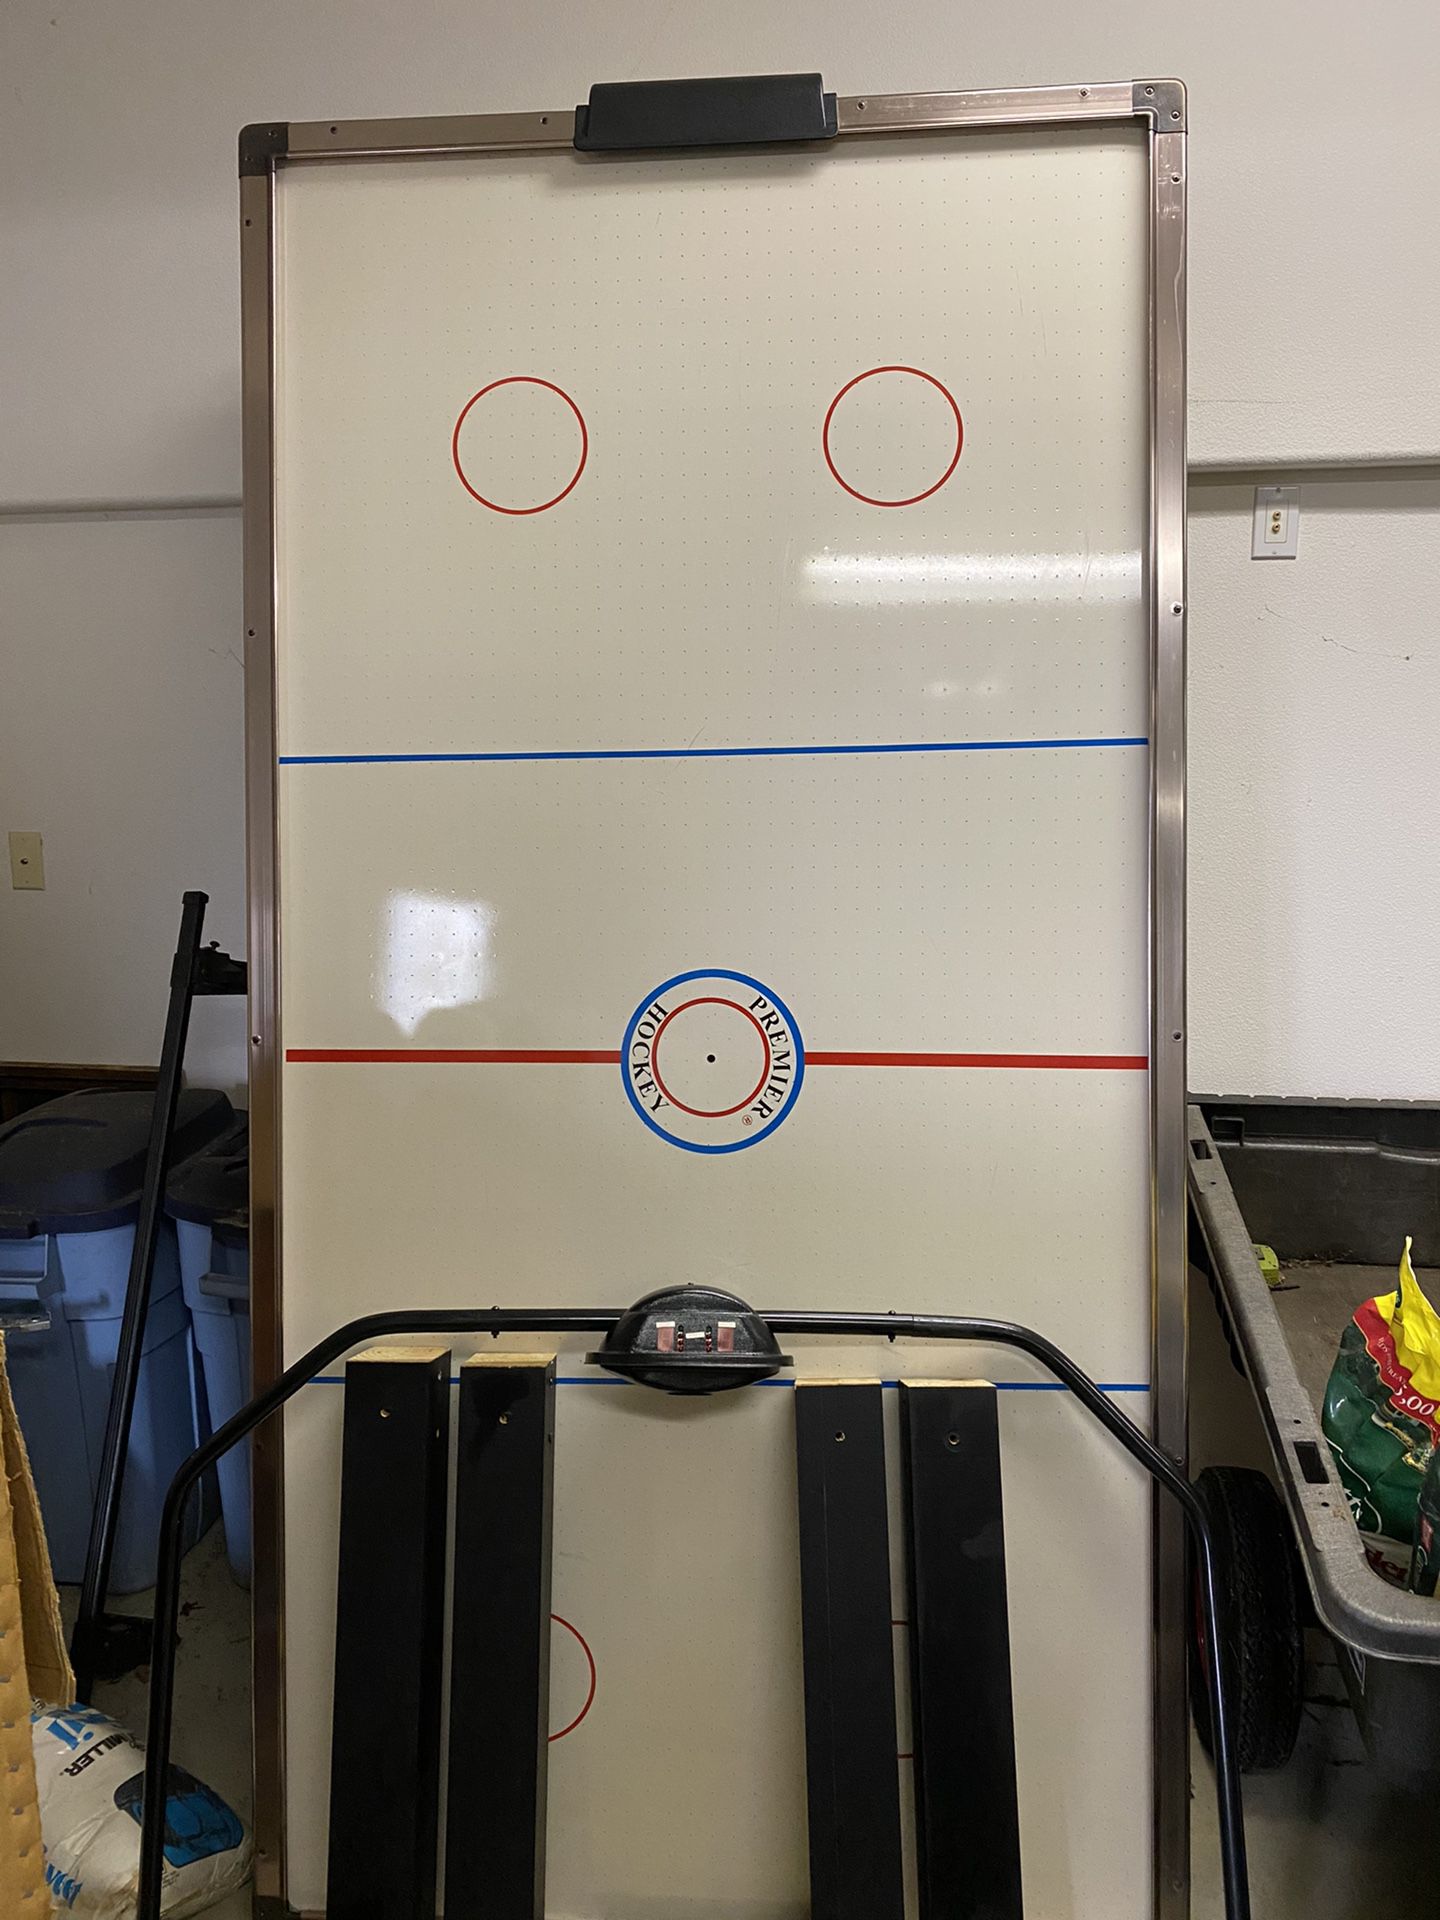 REAL Arcade Quality Air Hockey Table in Great Condition!